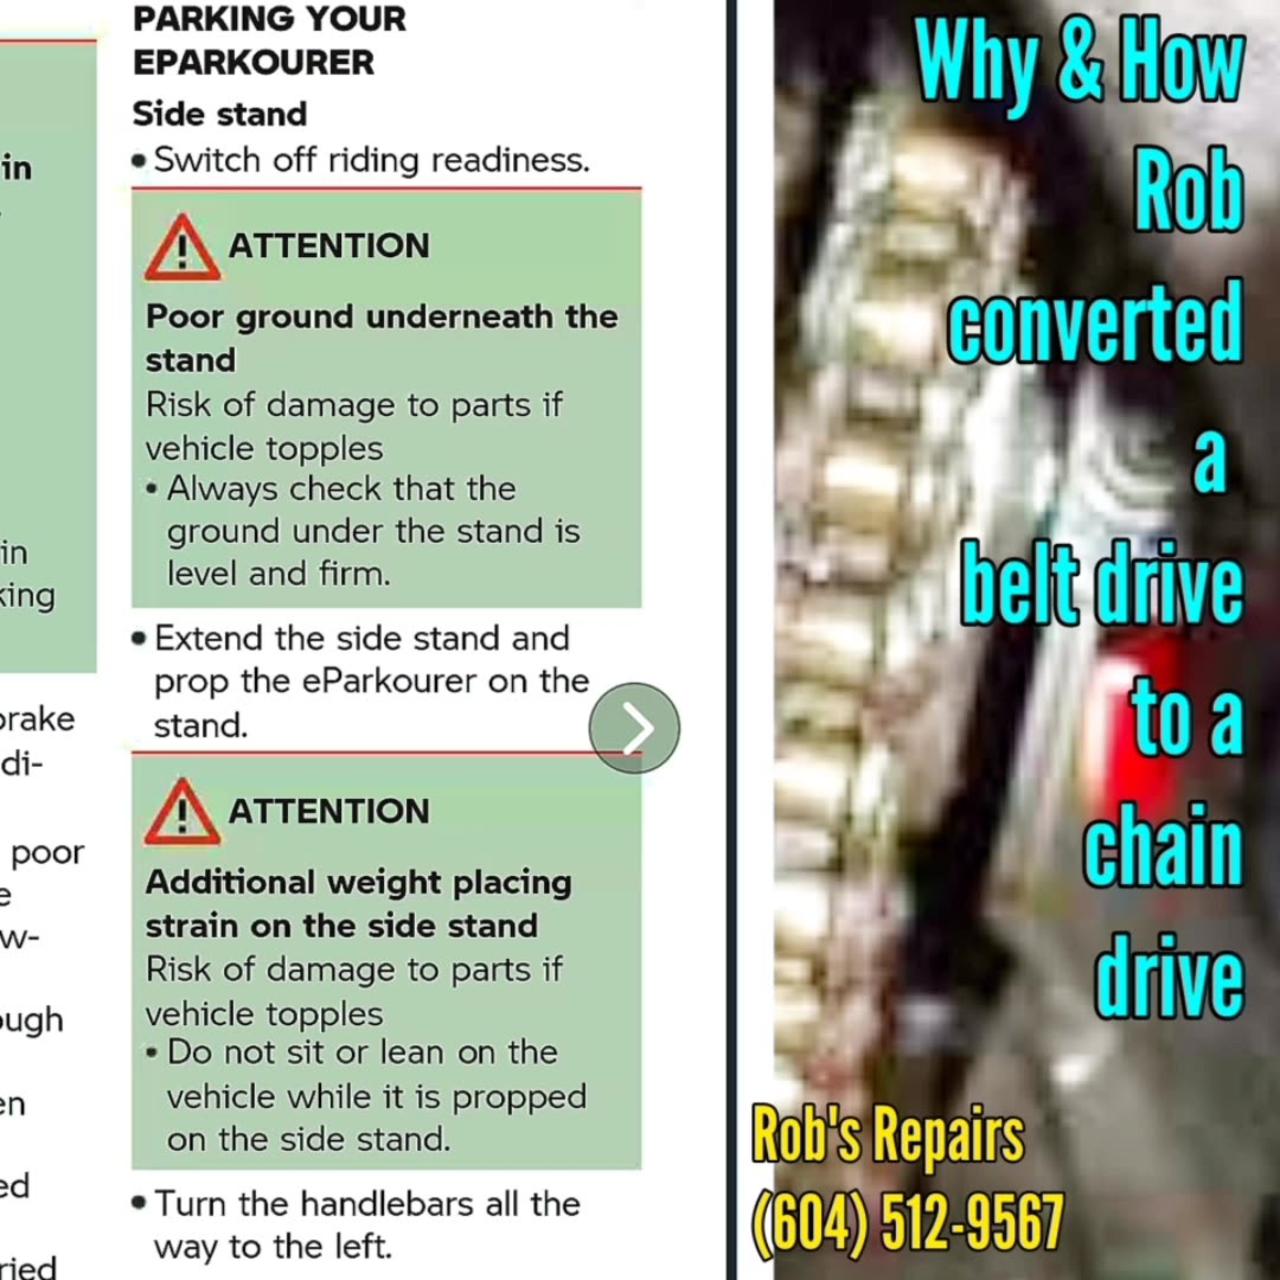 Why & How Rob converted a belt drive to a chain drive - for BMW CE 02